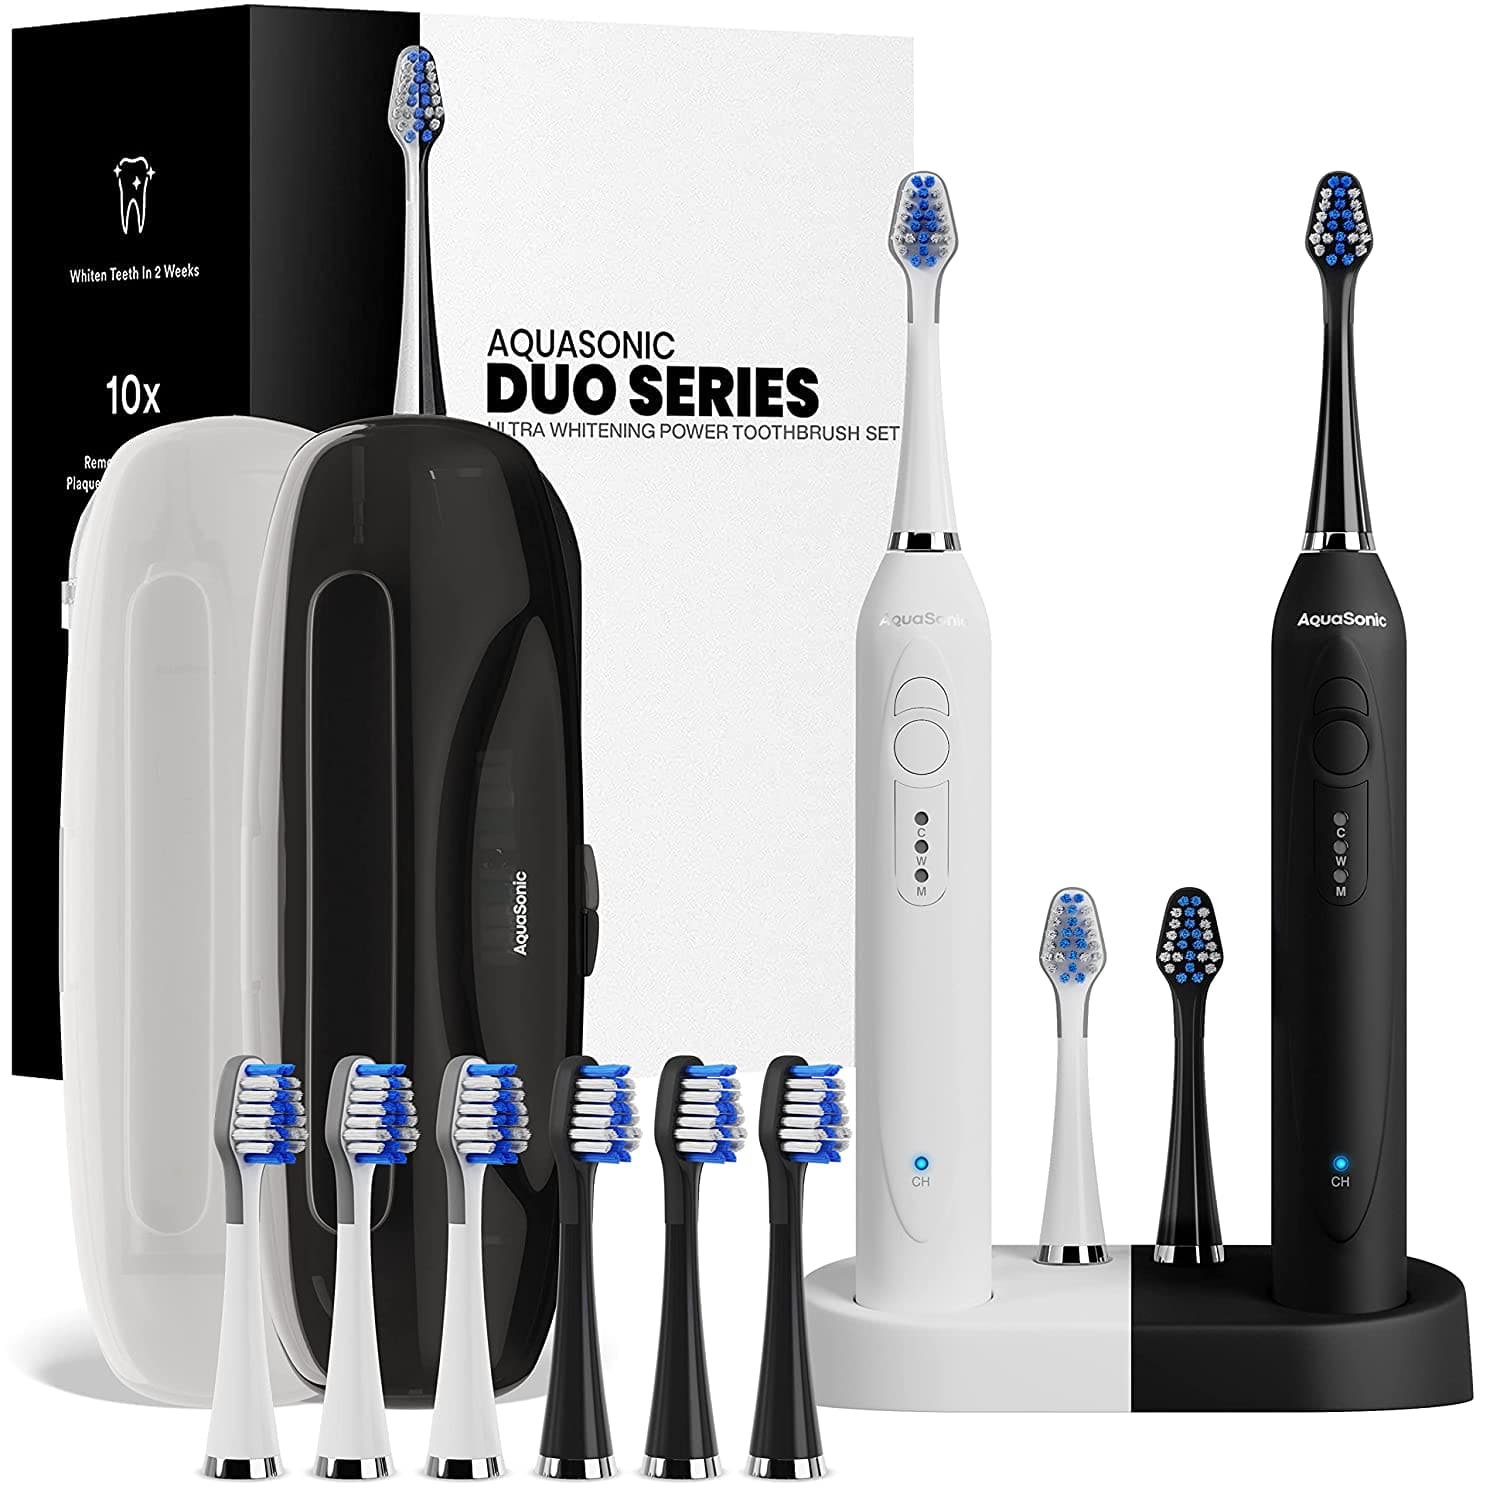 The best electric toothbrush with dual handle is aquasonic DUO